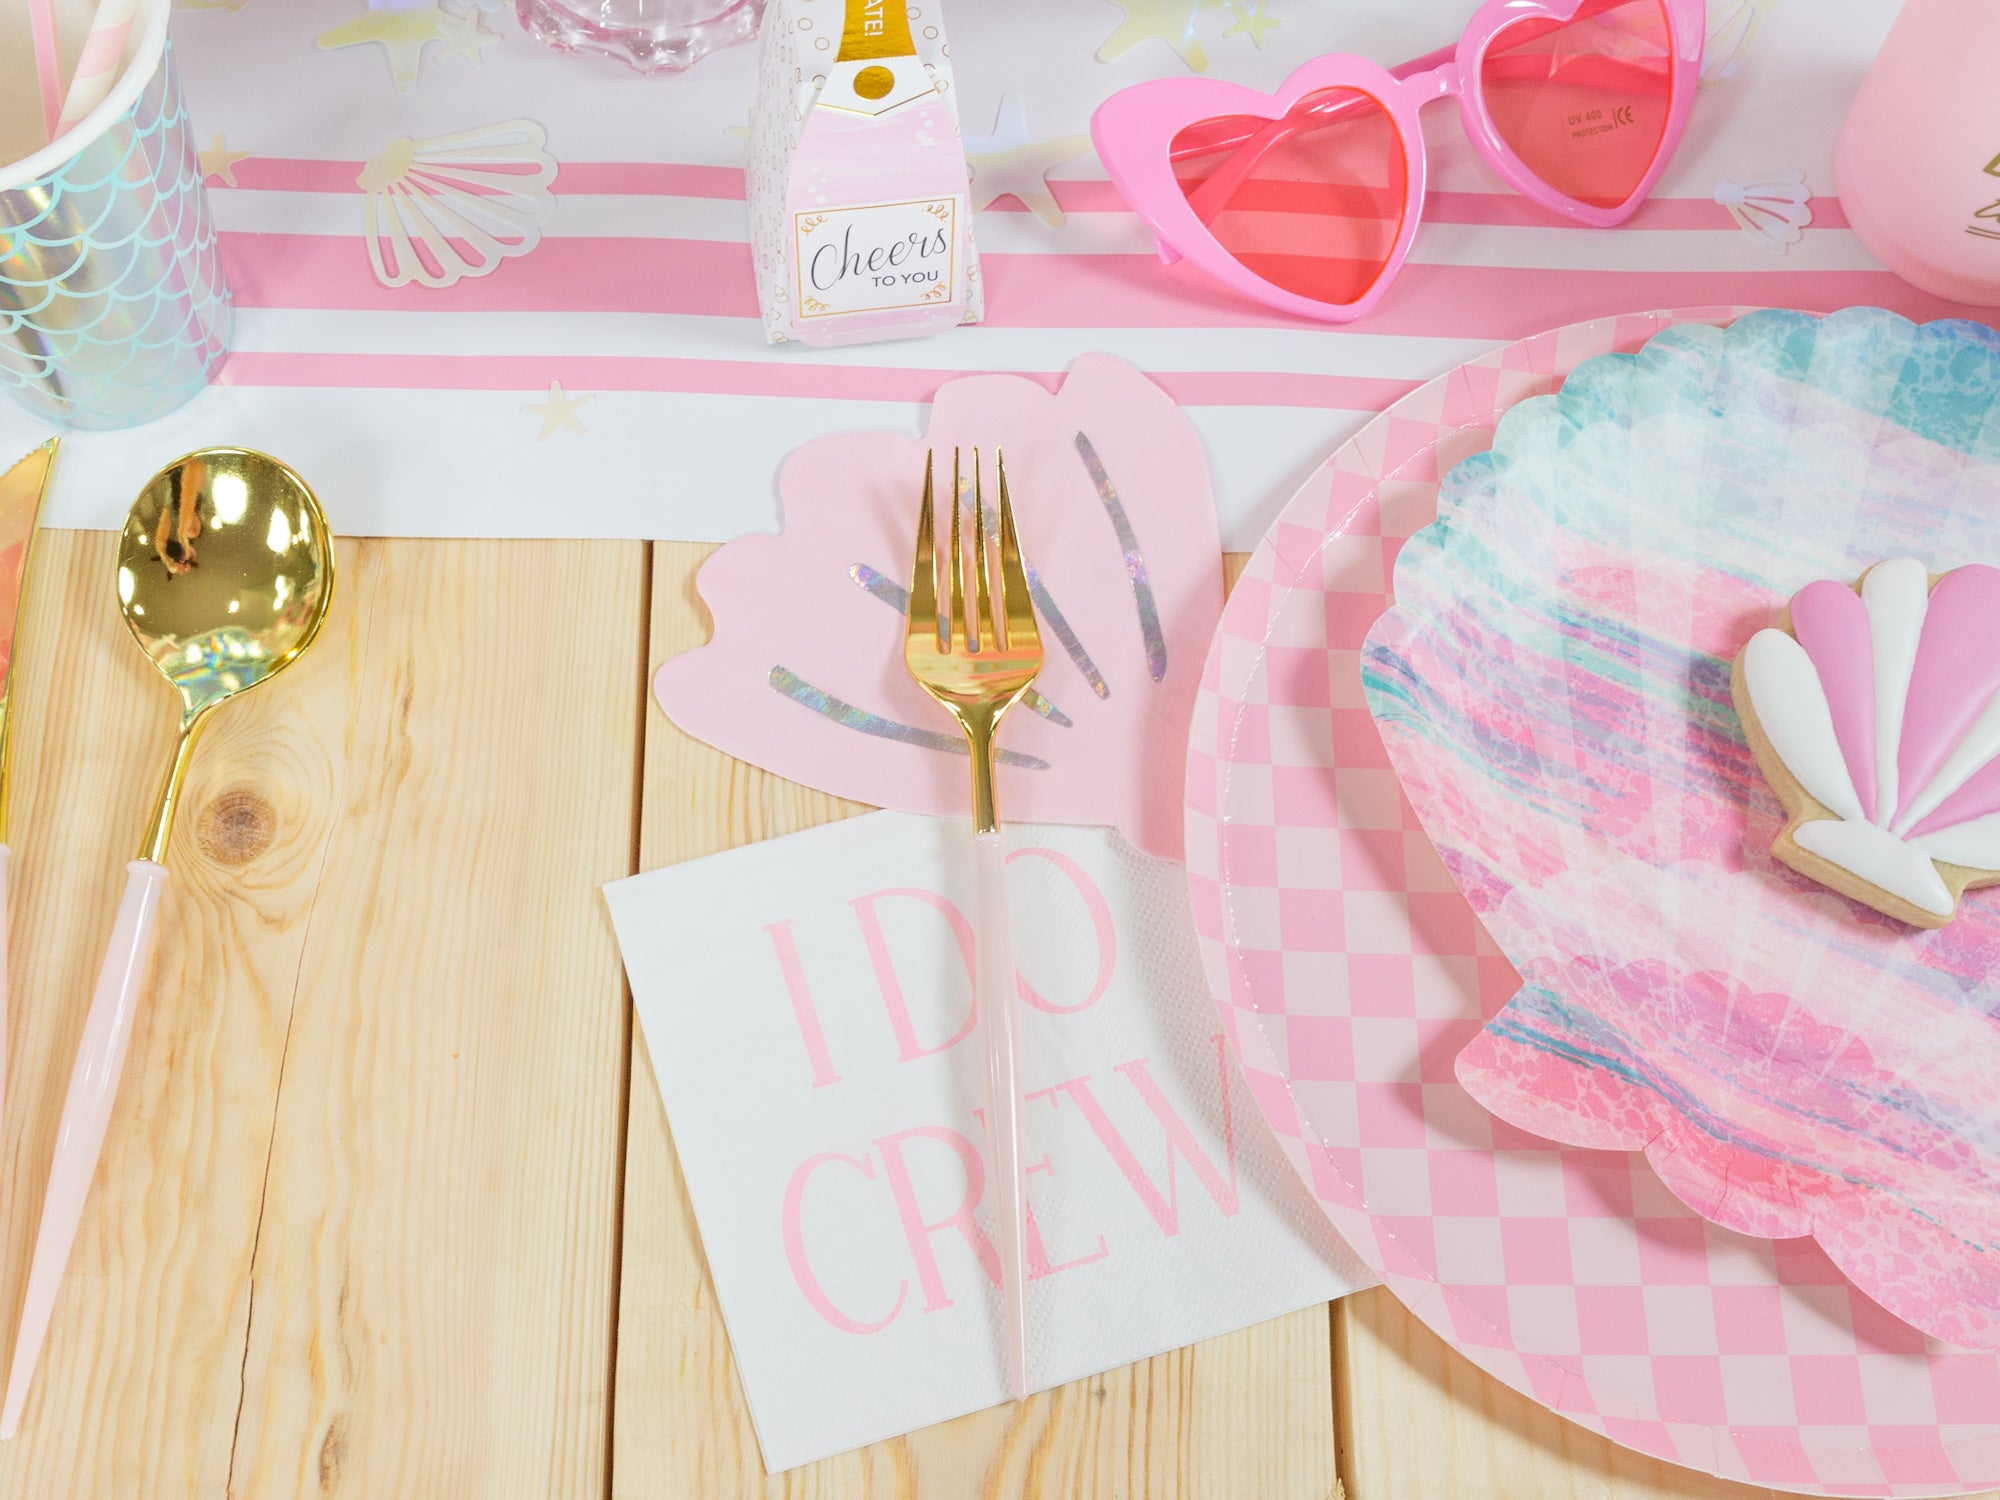 I Do Crew Napkins and Forks | The Party Darling